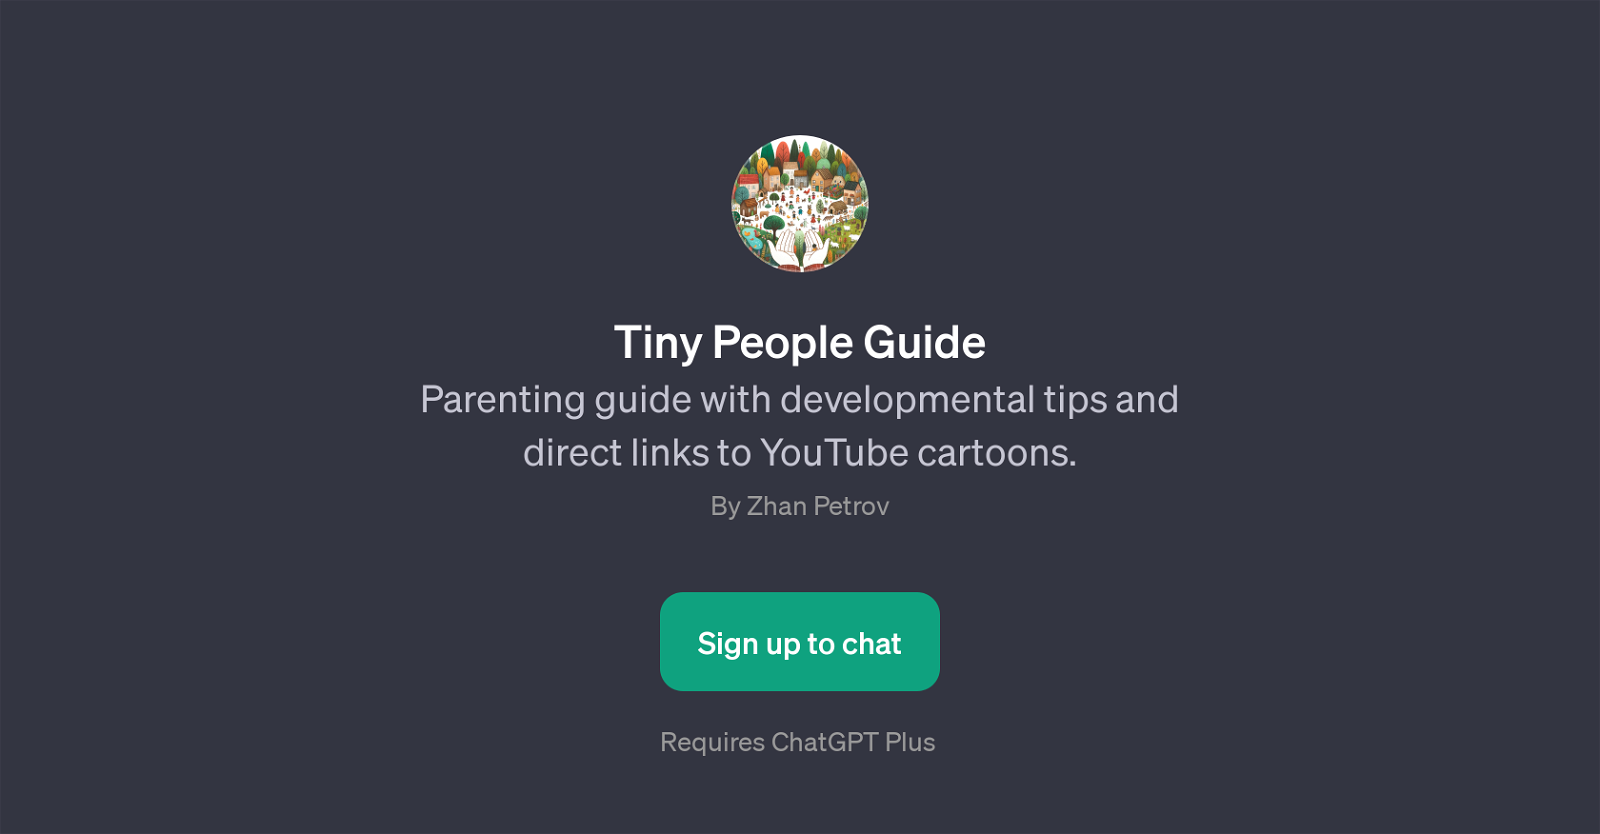 Tiny People Guide website